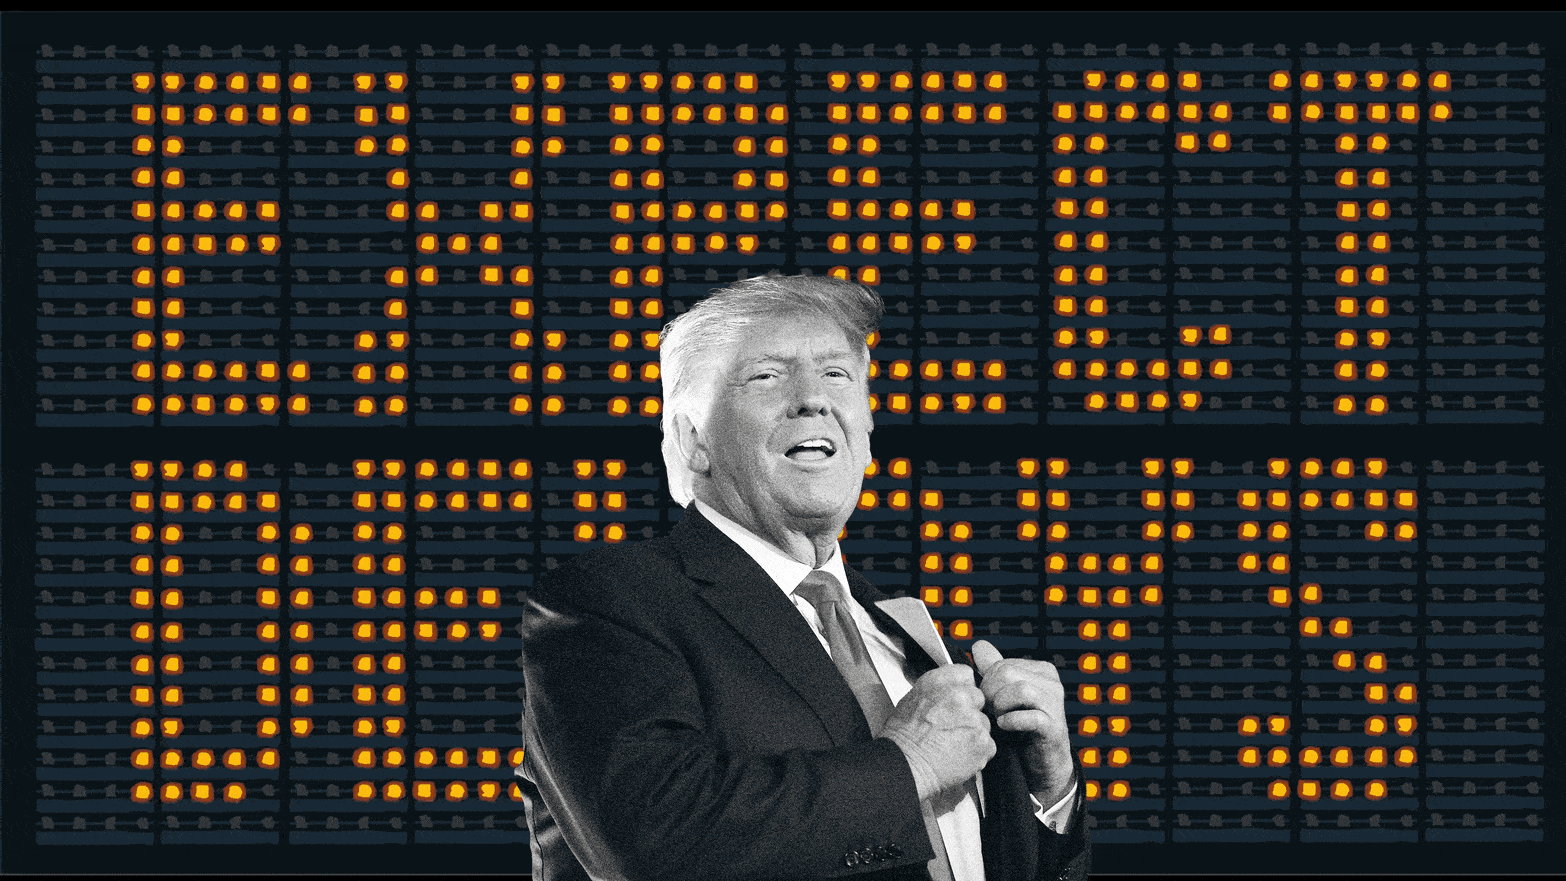 An animated gif of Donald Trump in front of a 'Expect Delays' flashing sign.